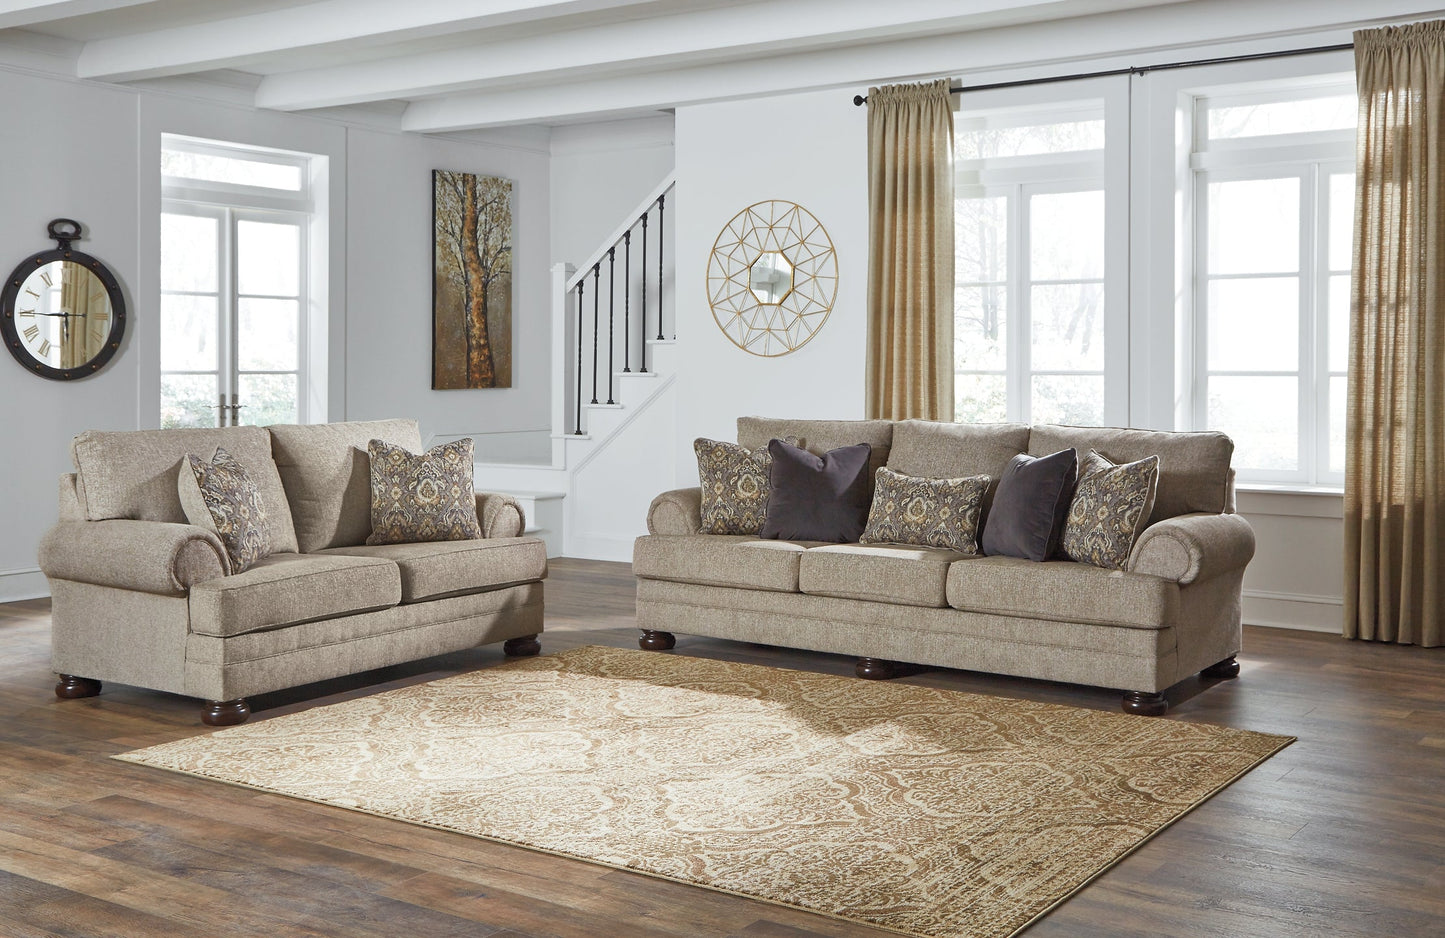 Kananwood Sofa and Loveseat at Walker Mattress and Furniture Locations in Cedar Park and Belton TX.